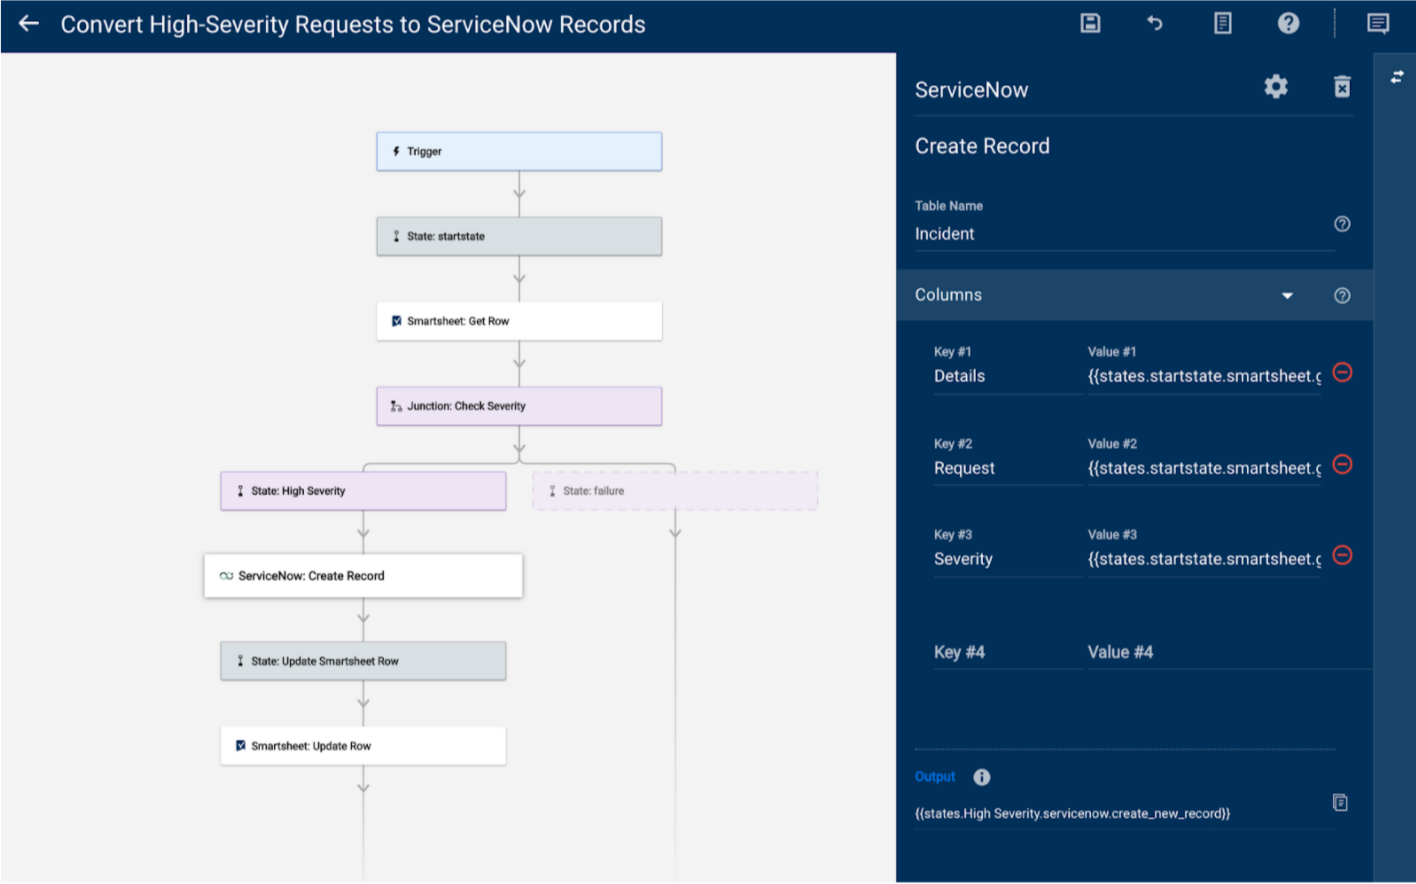 Convert High-Severity Requests to ServiceNow Records